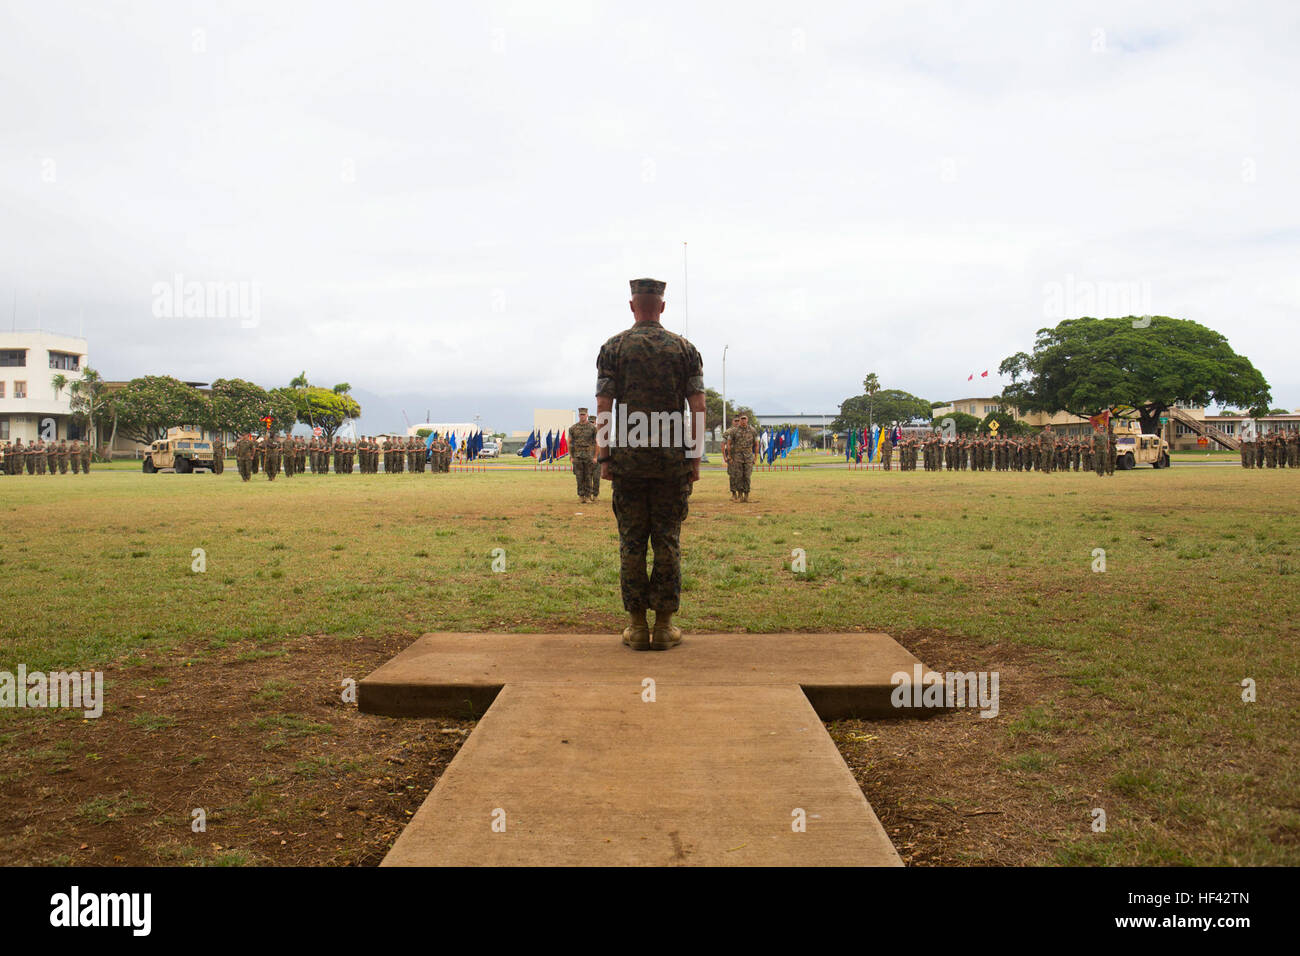 MARINE CORPS BASE HAWAII - Col. Carl E. Cooper, the commanding officer for 3d Marine Regiment, calls the battalion to attention at the 1st Battalion, 3rd Marine Regiment change of command ceremony held at Dewey Square aboard Marine Corps Base Hawaii, July 22, 2016. Lt. Col. Jeremiah Salame, the incoming commanding officer for 1st Bn., 3rd Marines, relieved Lt. Col. Quintin Jones, the outgoing commanding officer for 1st Bn., 3rd Marines, after Jones served four years as 1st Bn., 3rd Marines' commanding officer. The change of command ceremony represents a transfer of authority and responsibility Stock Photo